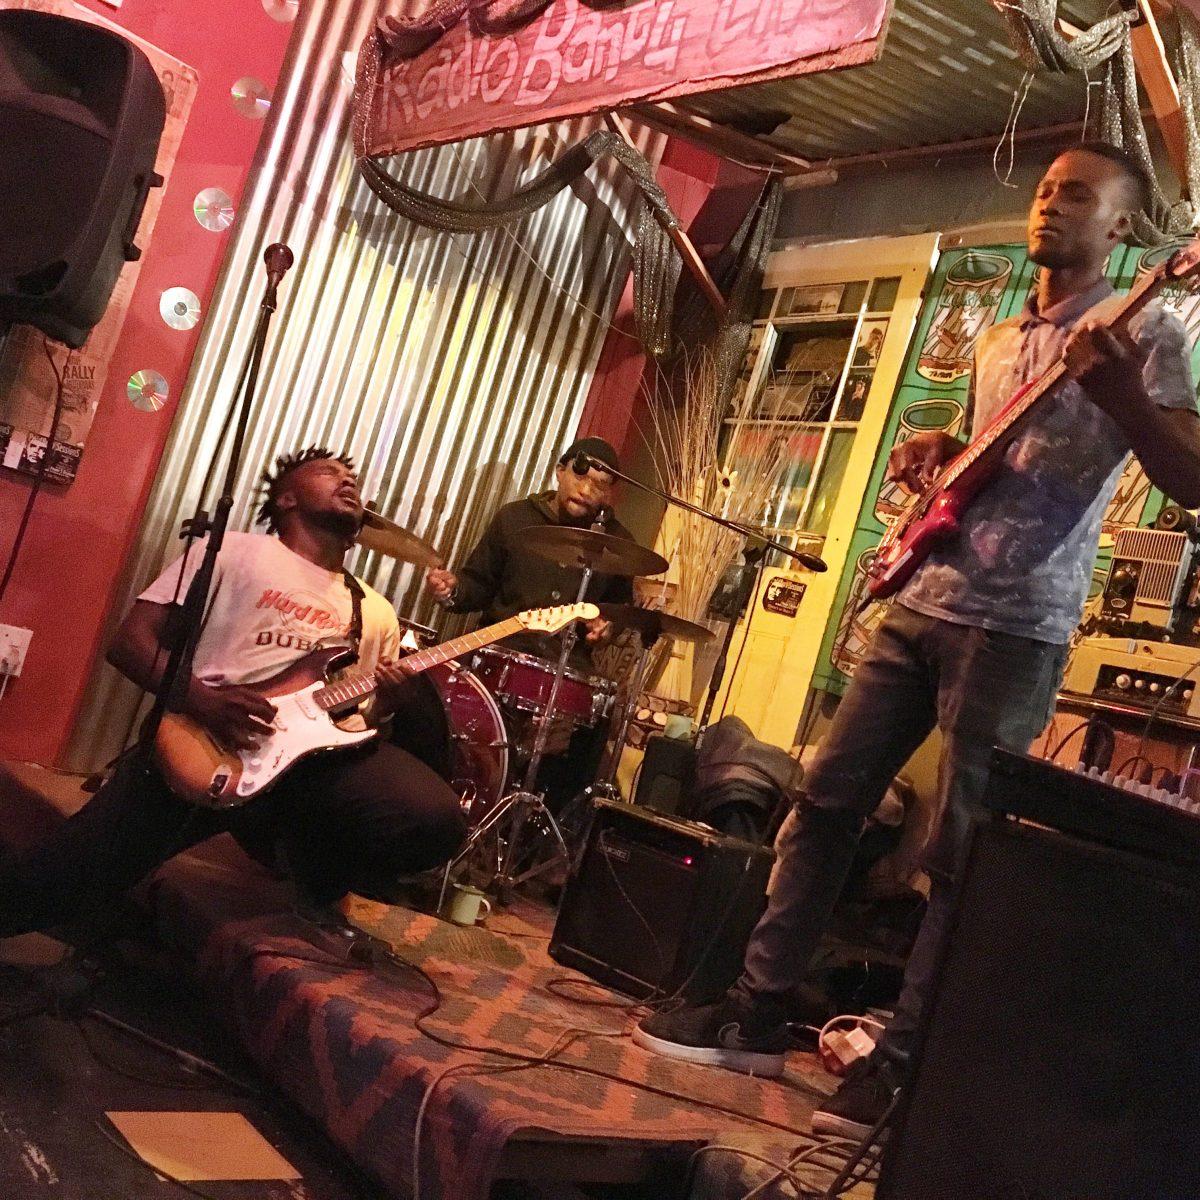 Shameless, a three-person rock n roll band from Soweto, played for the first time last month at The Roving Bantu Kitchen in Johannesburg. PHOTO: The Hawk 